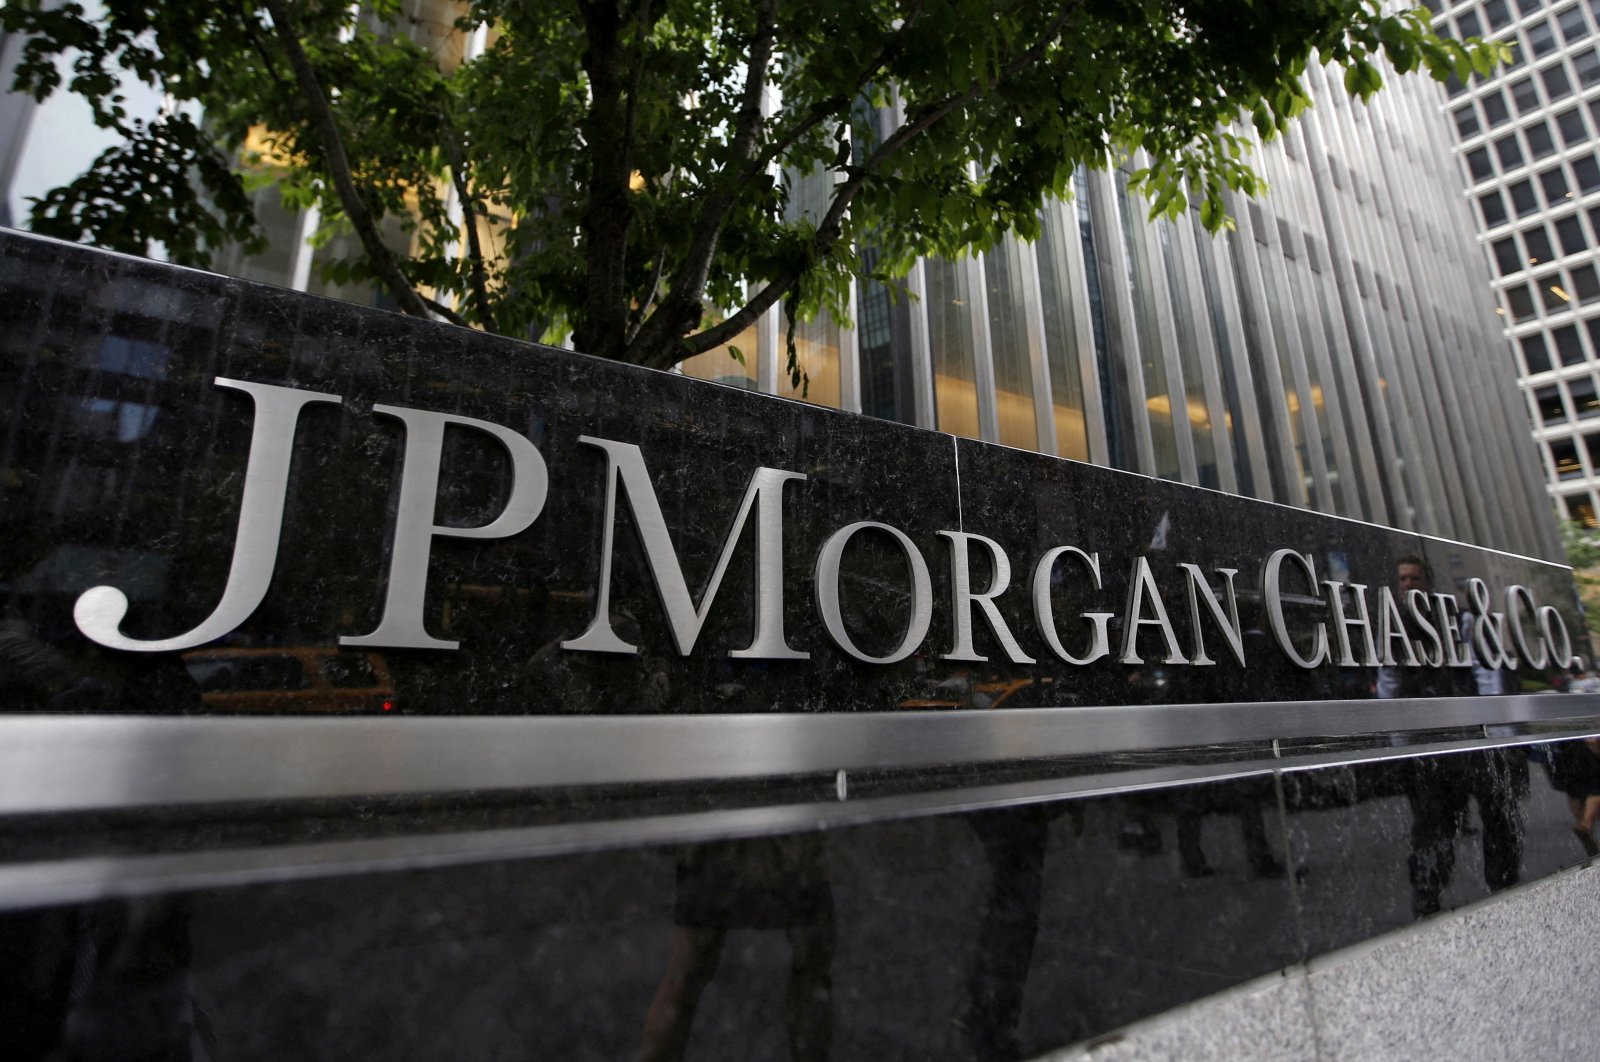 JPMorgan says its assets in Russia may be seized after lawsuits